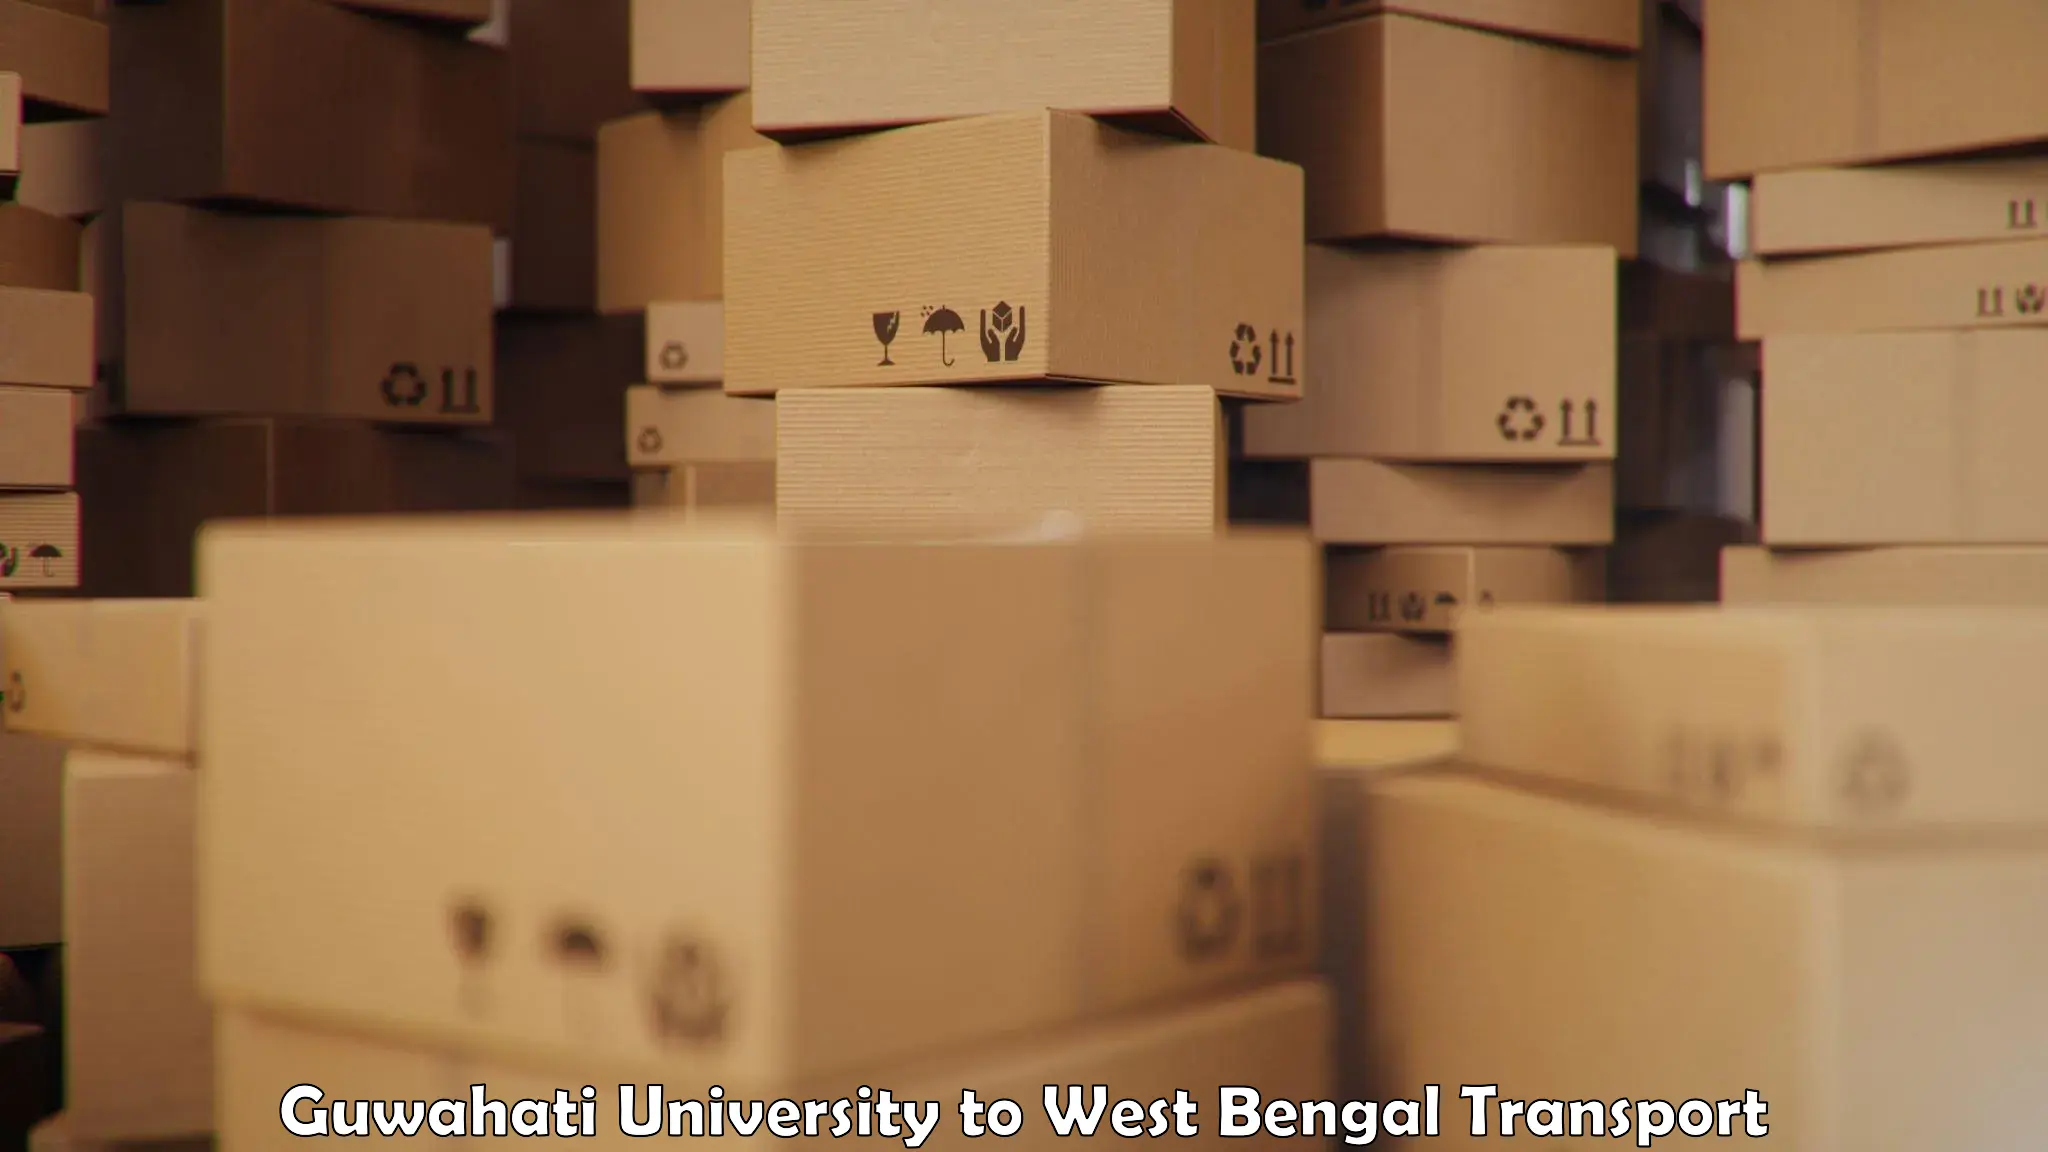 Transport services Guwahati University to West Bengal